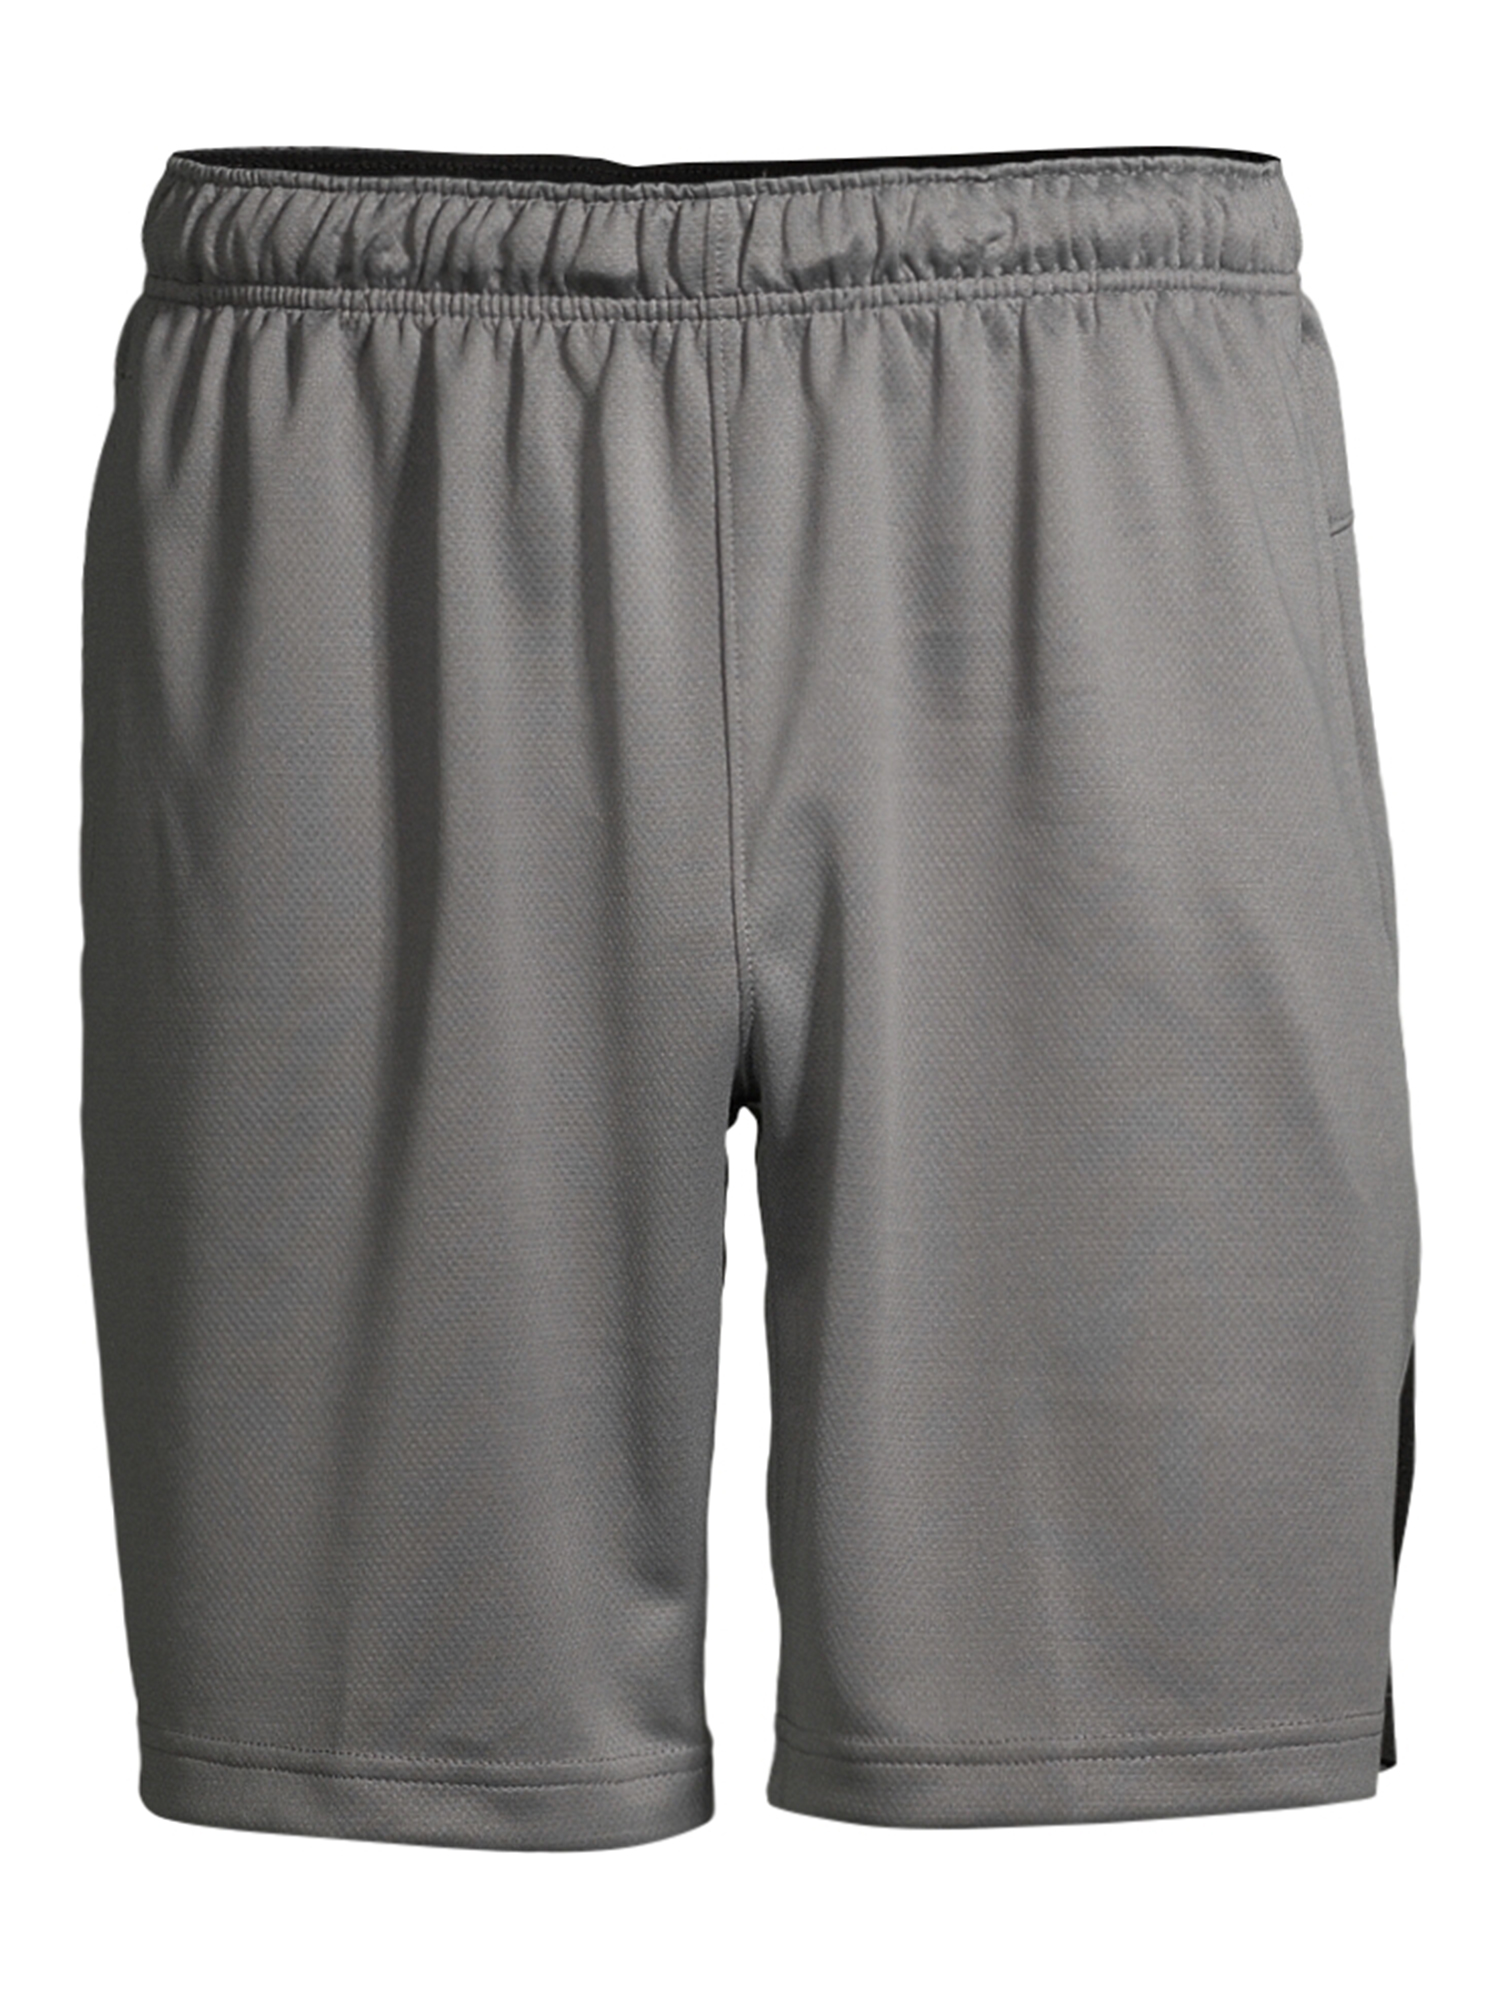 Russell Men's and Big Men's 9" Core Training Active Shorts, up to Size 5xl - image 3 of 6